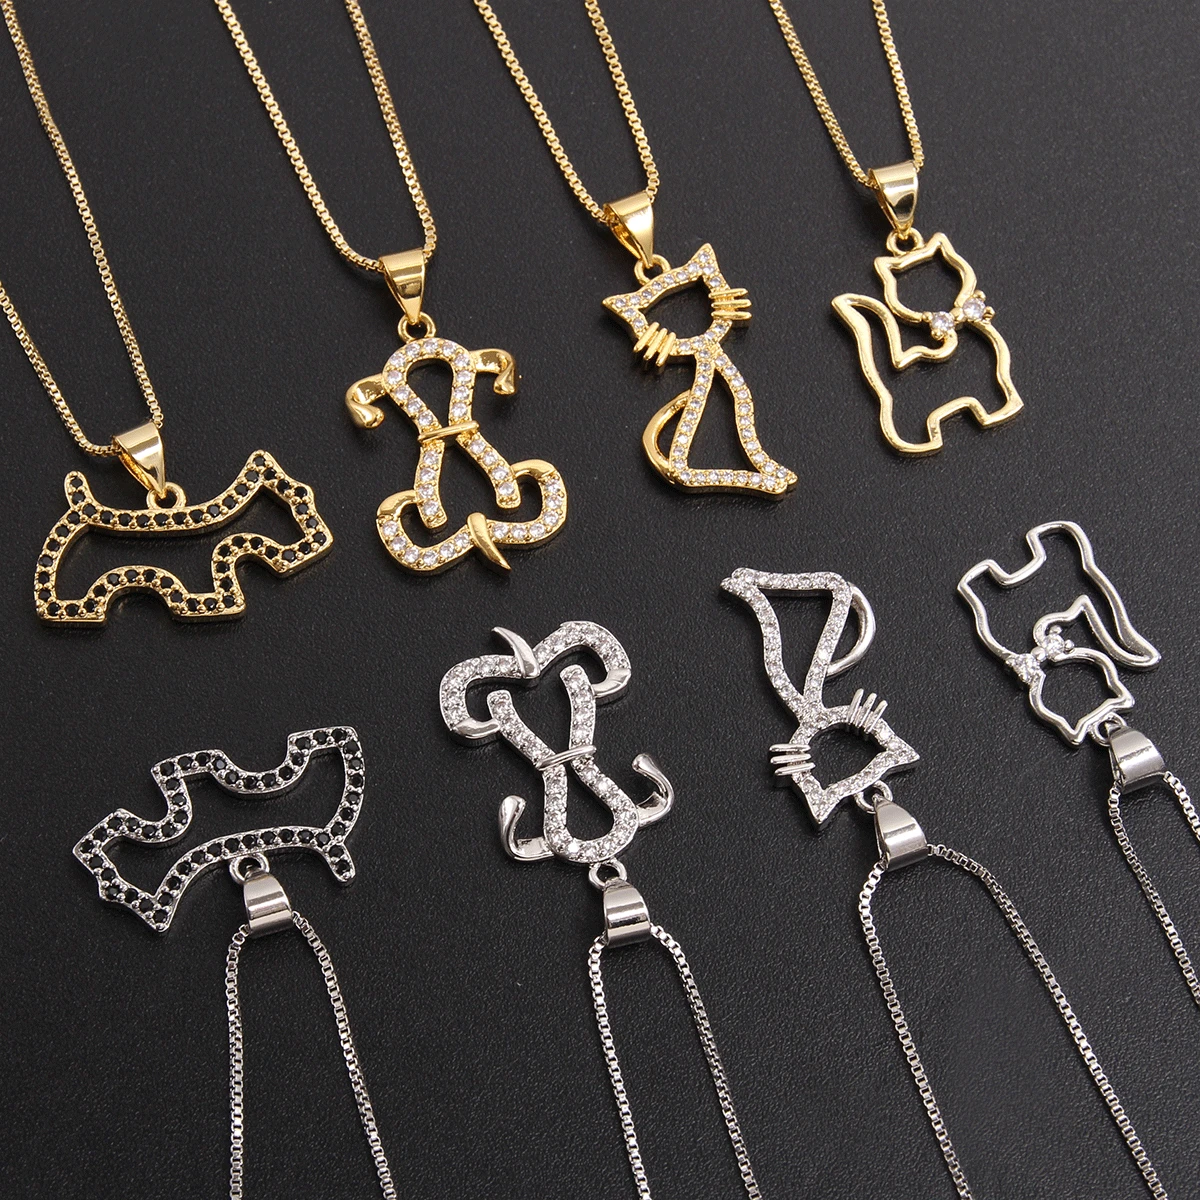 

MHS.SUN Lovely Animal Dog Cat Zircon Pendant Necklace Gold Chain Choker Copper Jewelry For Charming Women's Day Gold/Silver 1PC